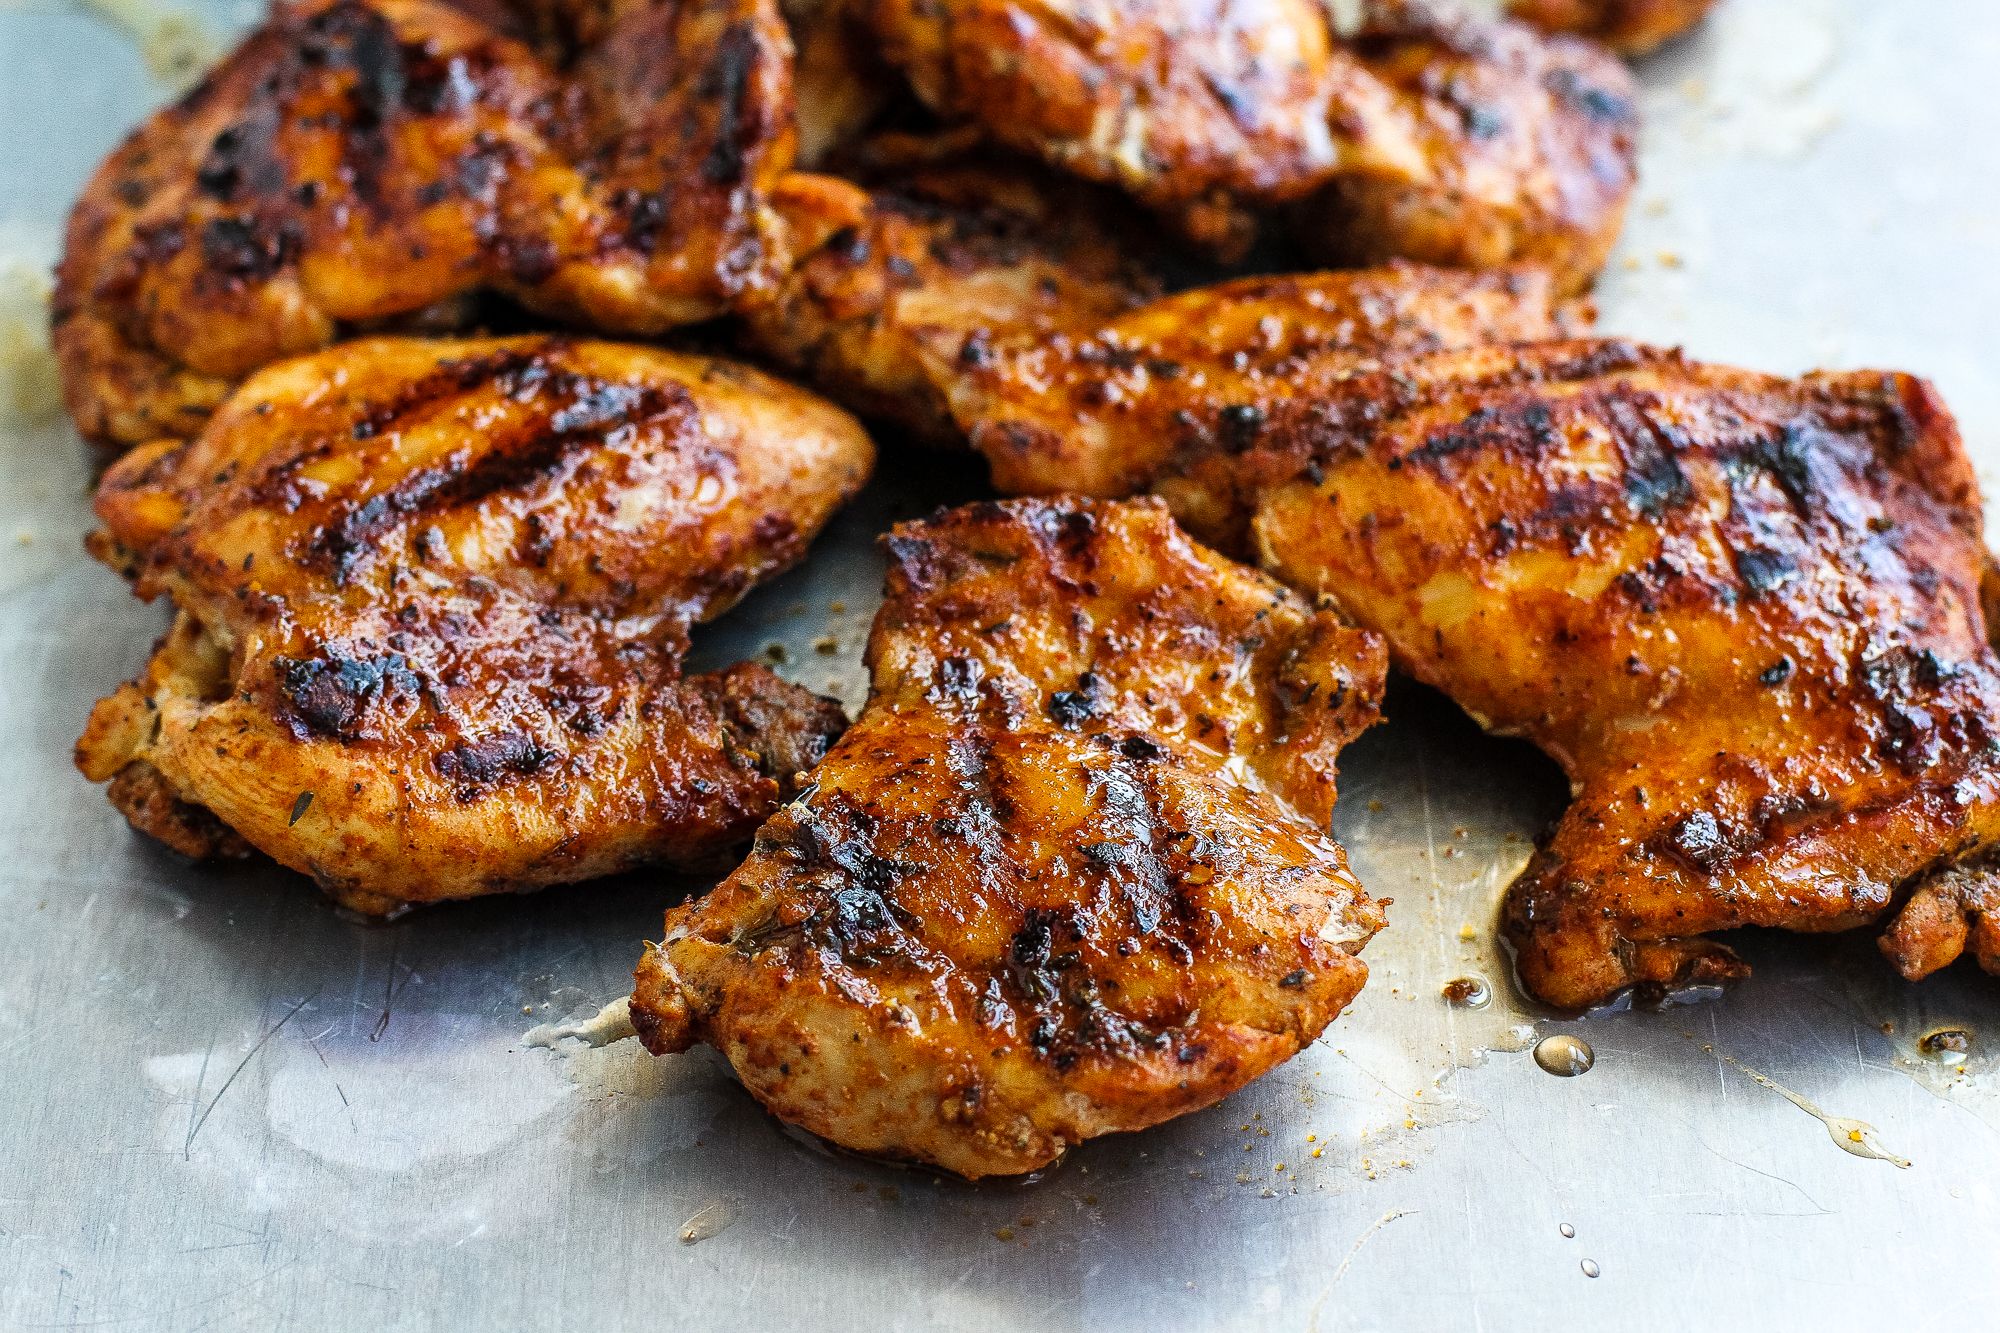 https://hips.hearstapps.com/thepioneerwoman/wp-content/uploads/2016/09/spice-rubbed-grilled-chicken-00.jpg